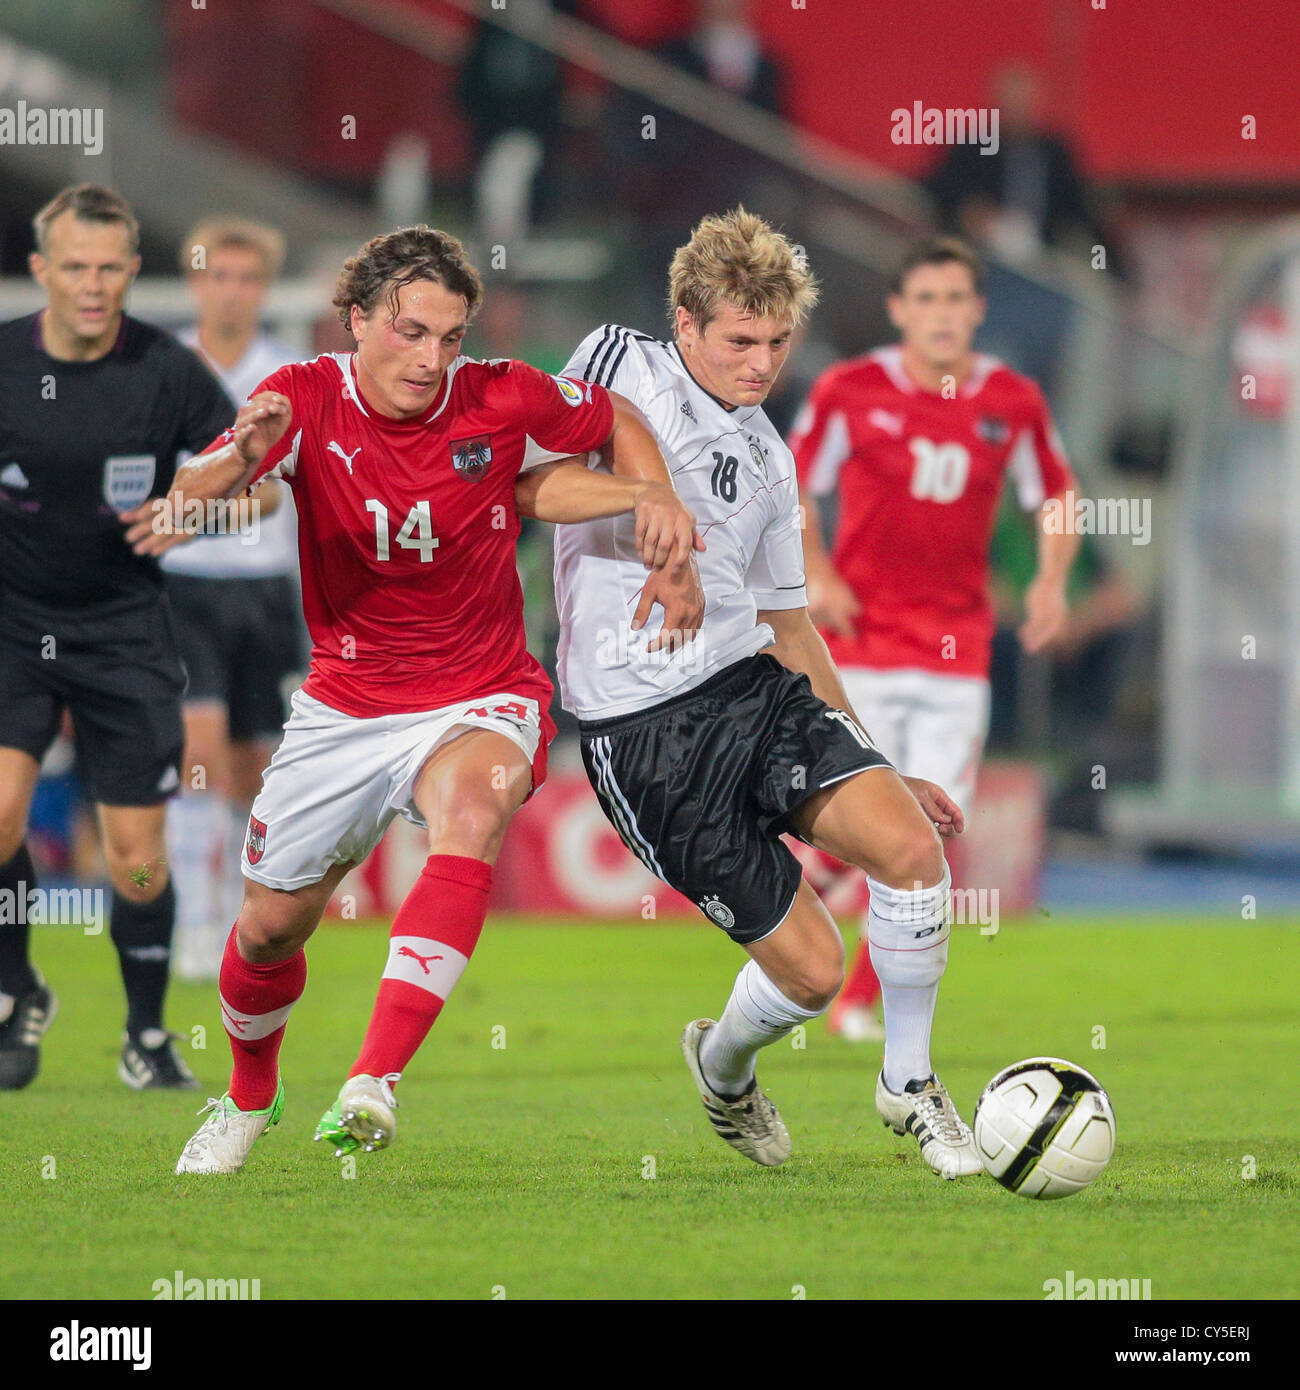 VIENNA, AUSTRIA - SEPTEMBER 11 Julian Baumgartlinger (#14 Austria) and Toni Kroos (#18 Germany) fight for the ball. Stock Photo